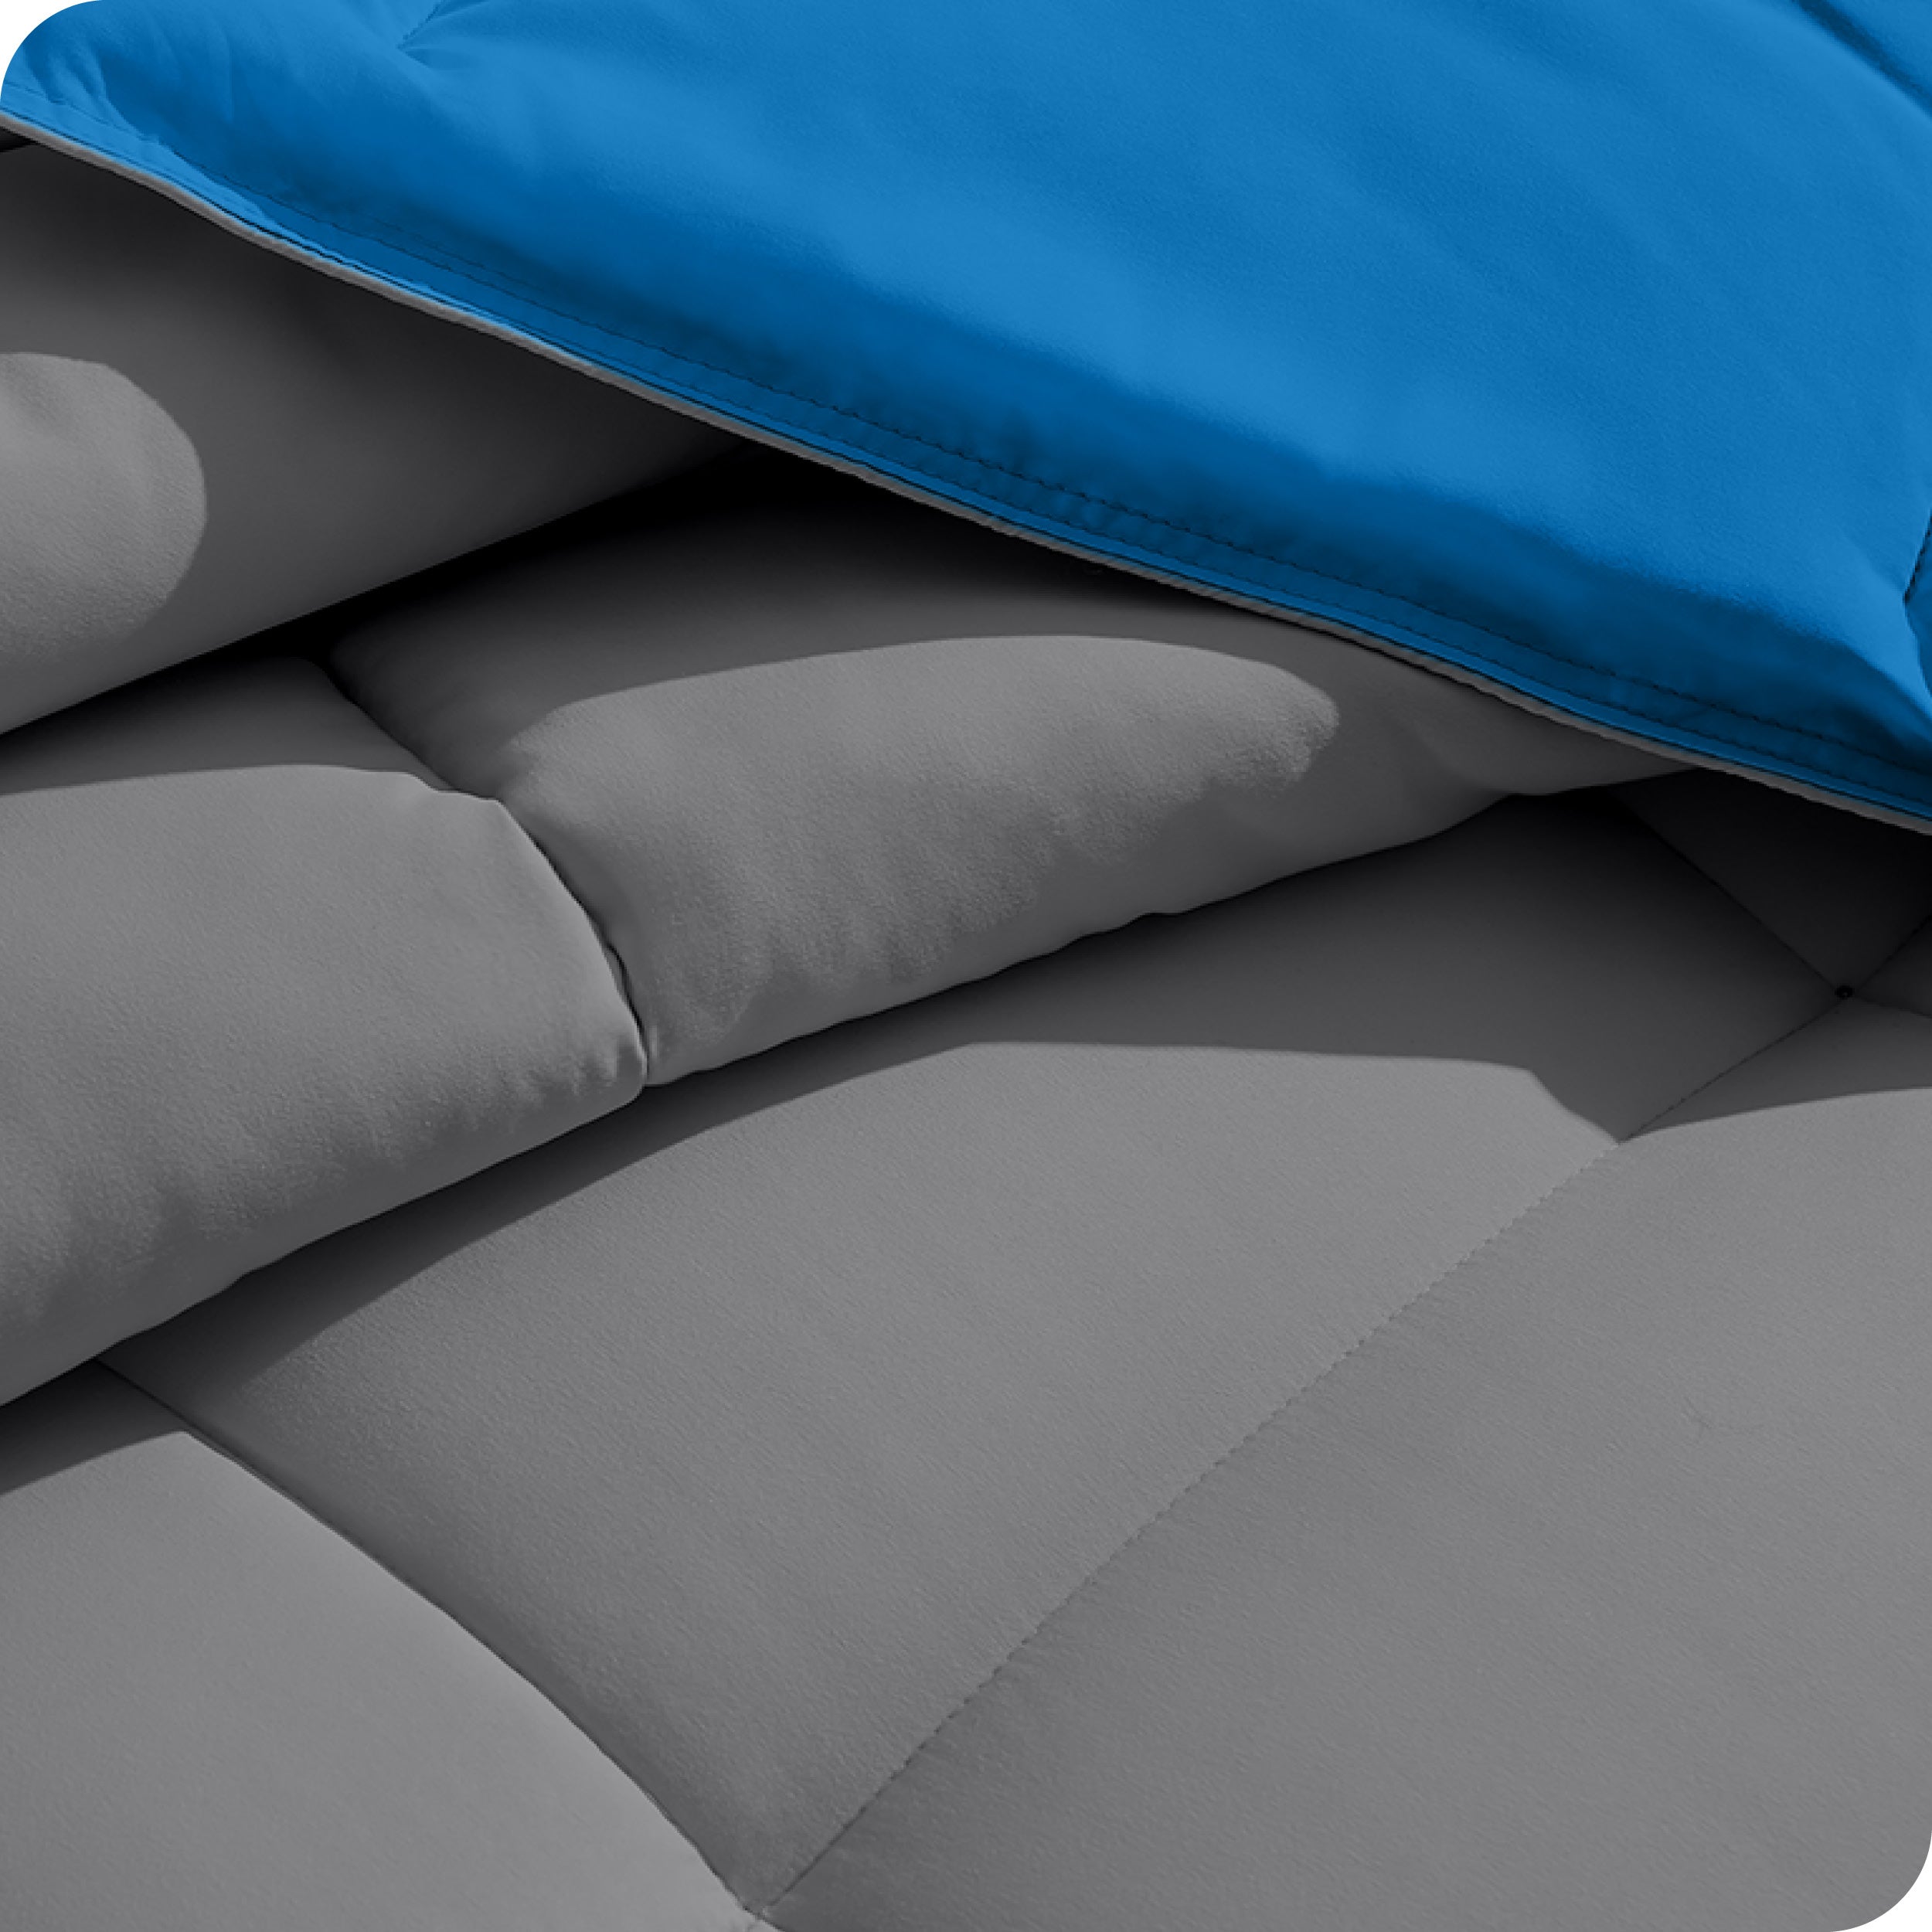 Close up of the reversible comforter showing the box stitching and the two colors